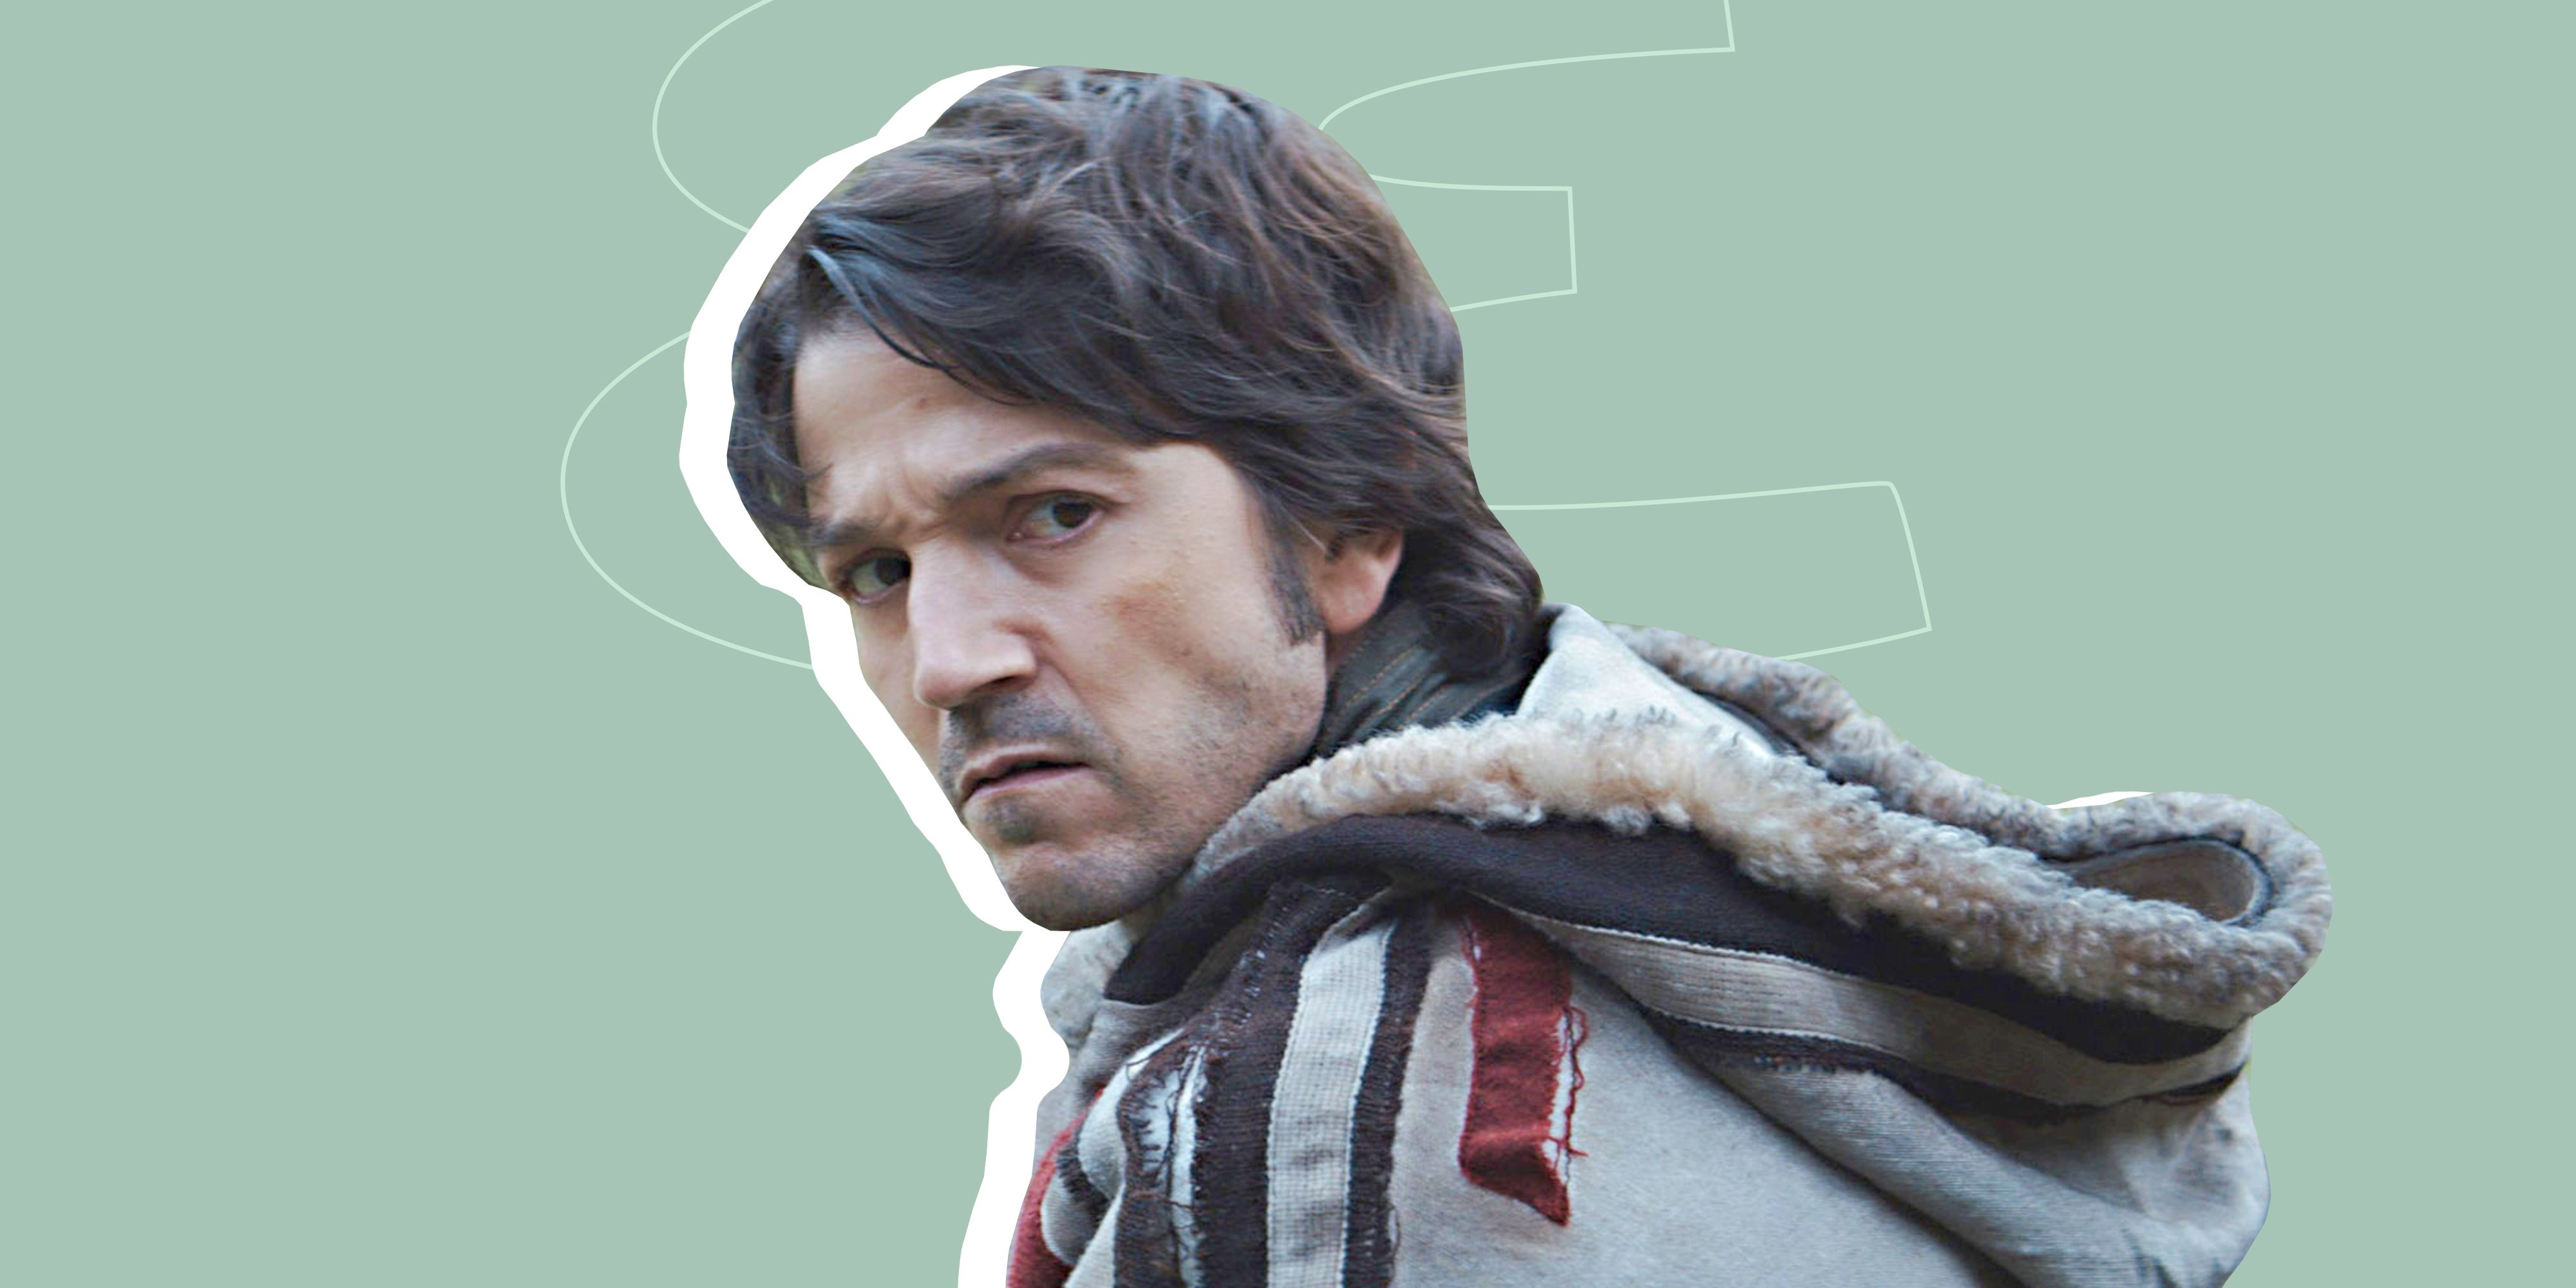 Andor Character Guide: Meet The Cast Of The Rogue One Prequel Series